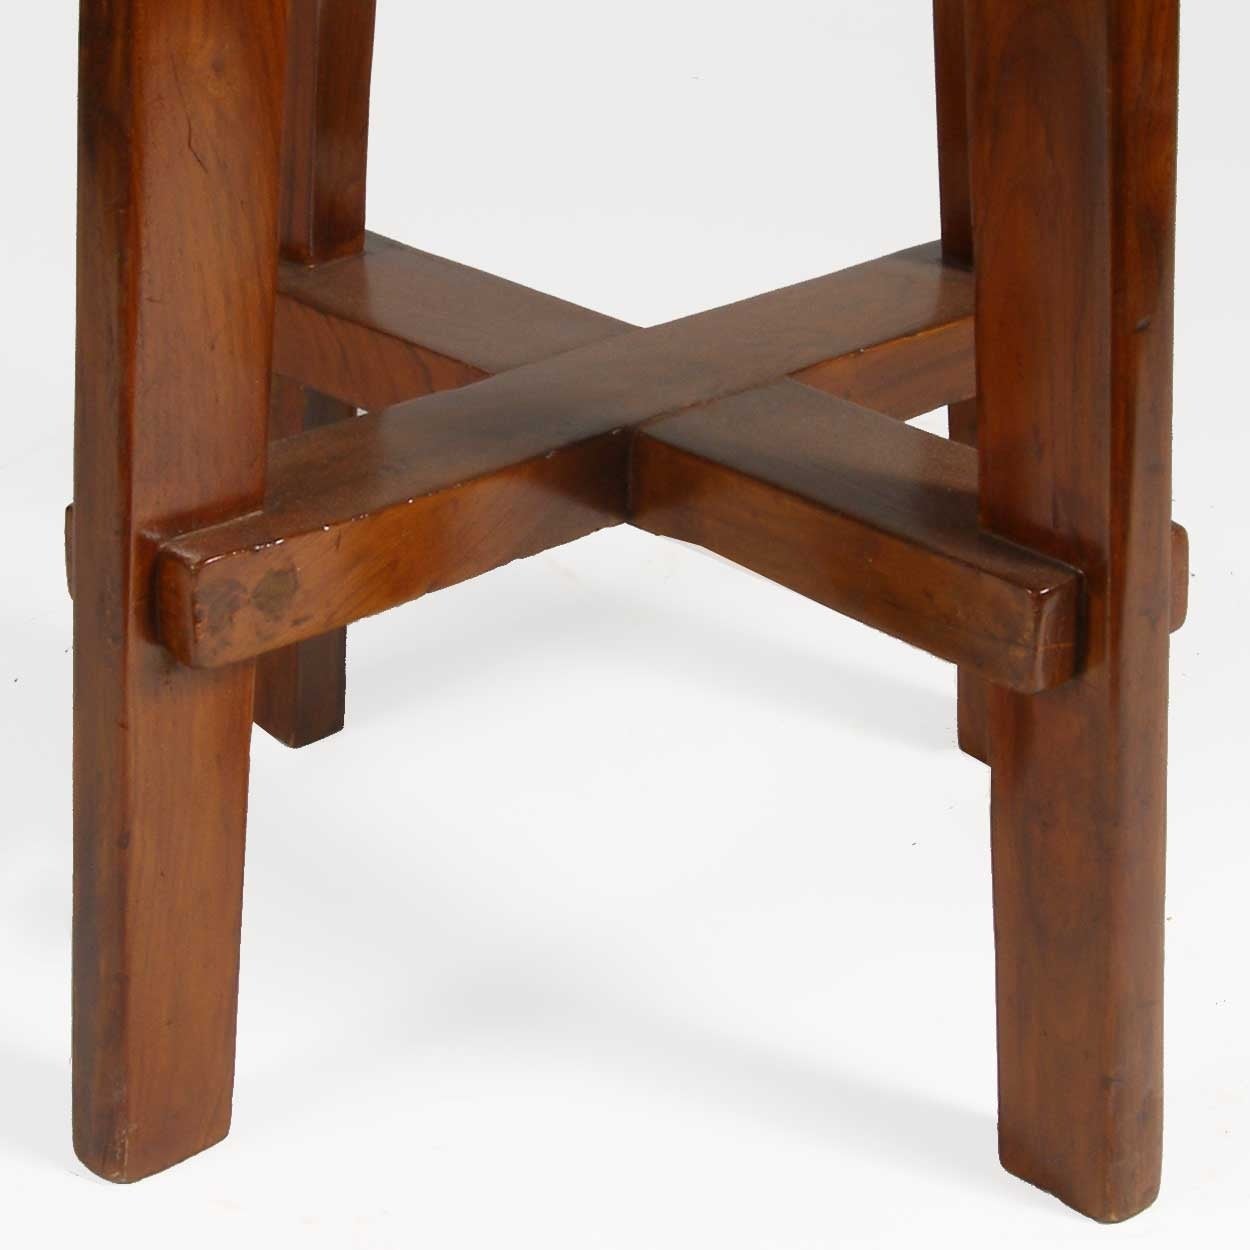 (Swiss, 1896-1967).
Crafted of solid teak with a round caned seat supported on four tapered legs joined by an X-stretcher.

Literature: E. Touchaleaume and G. Moreau, Le Corbusier and Pierre Jeanneret: The Indian Adventure,